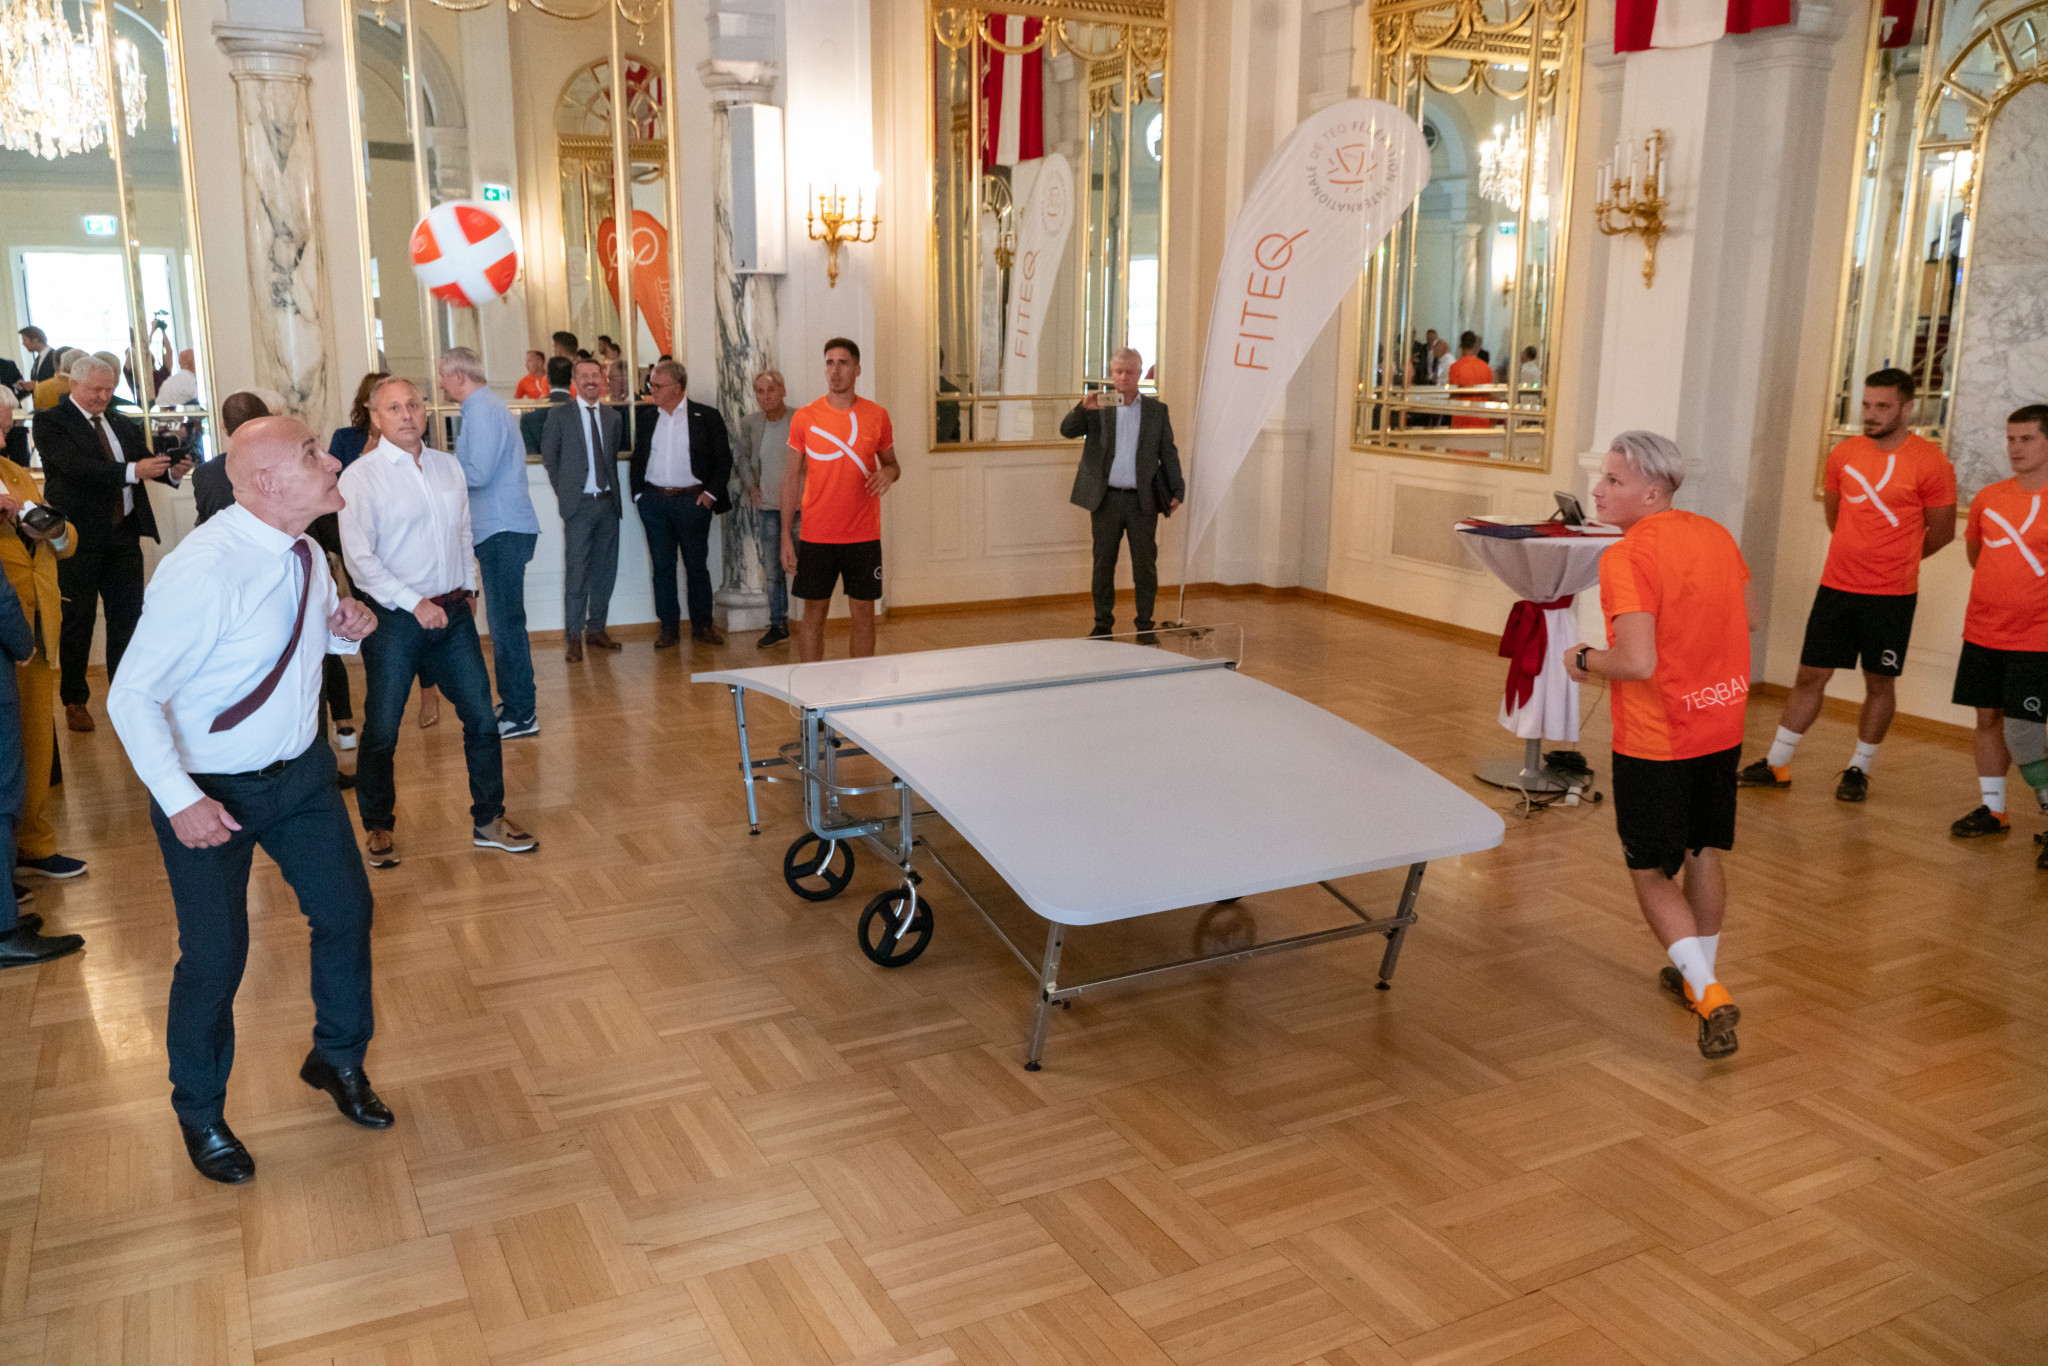 The presentation included a demonstration by professional players, with a particular focus on Para teqball, a sport established in March 2021 ©FITEQ